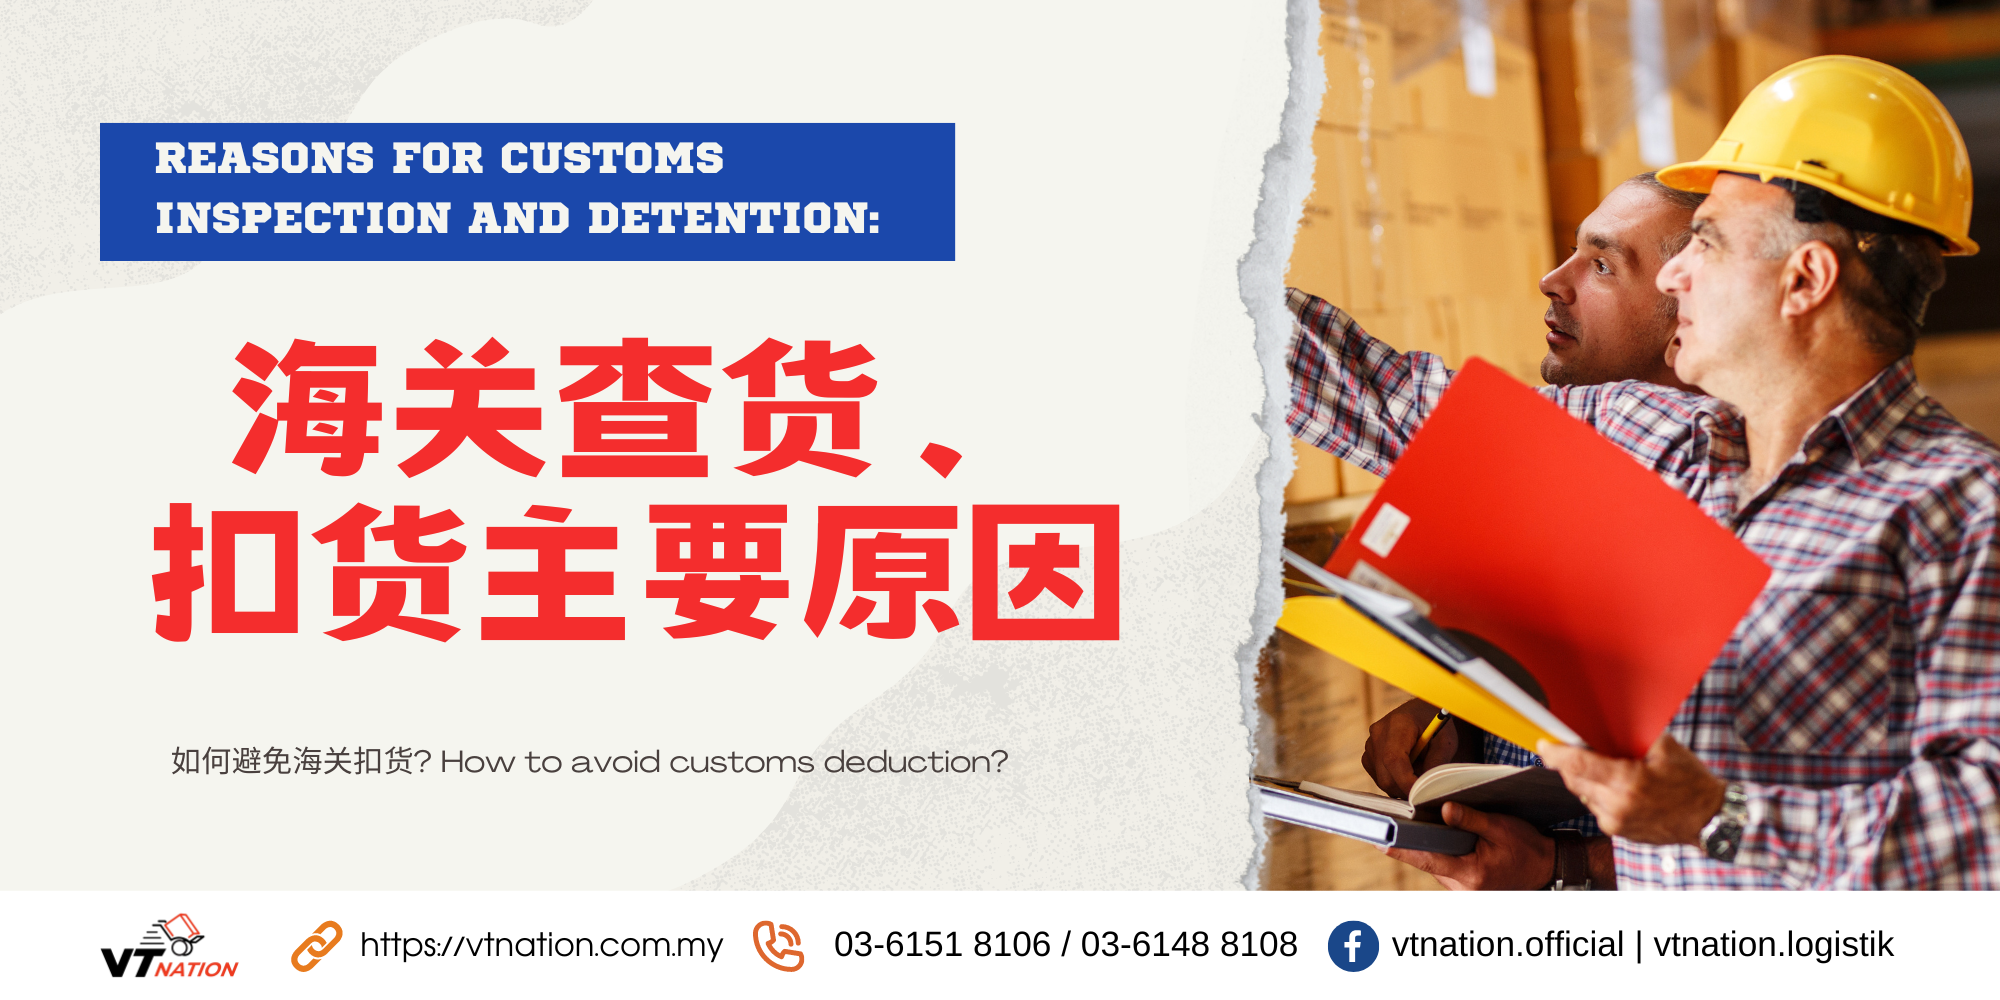 The main reasons for customs inspection and detention. How to avoid customs deduction?